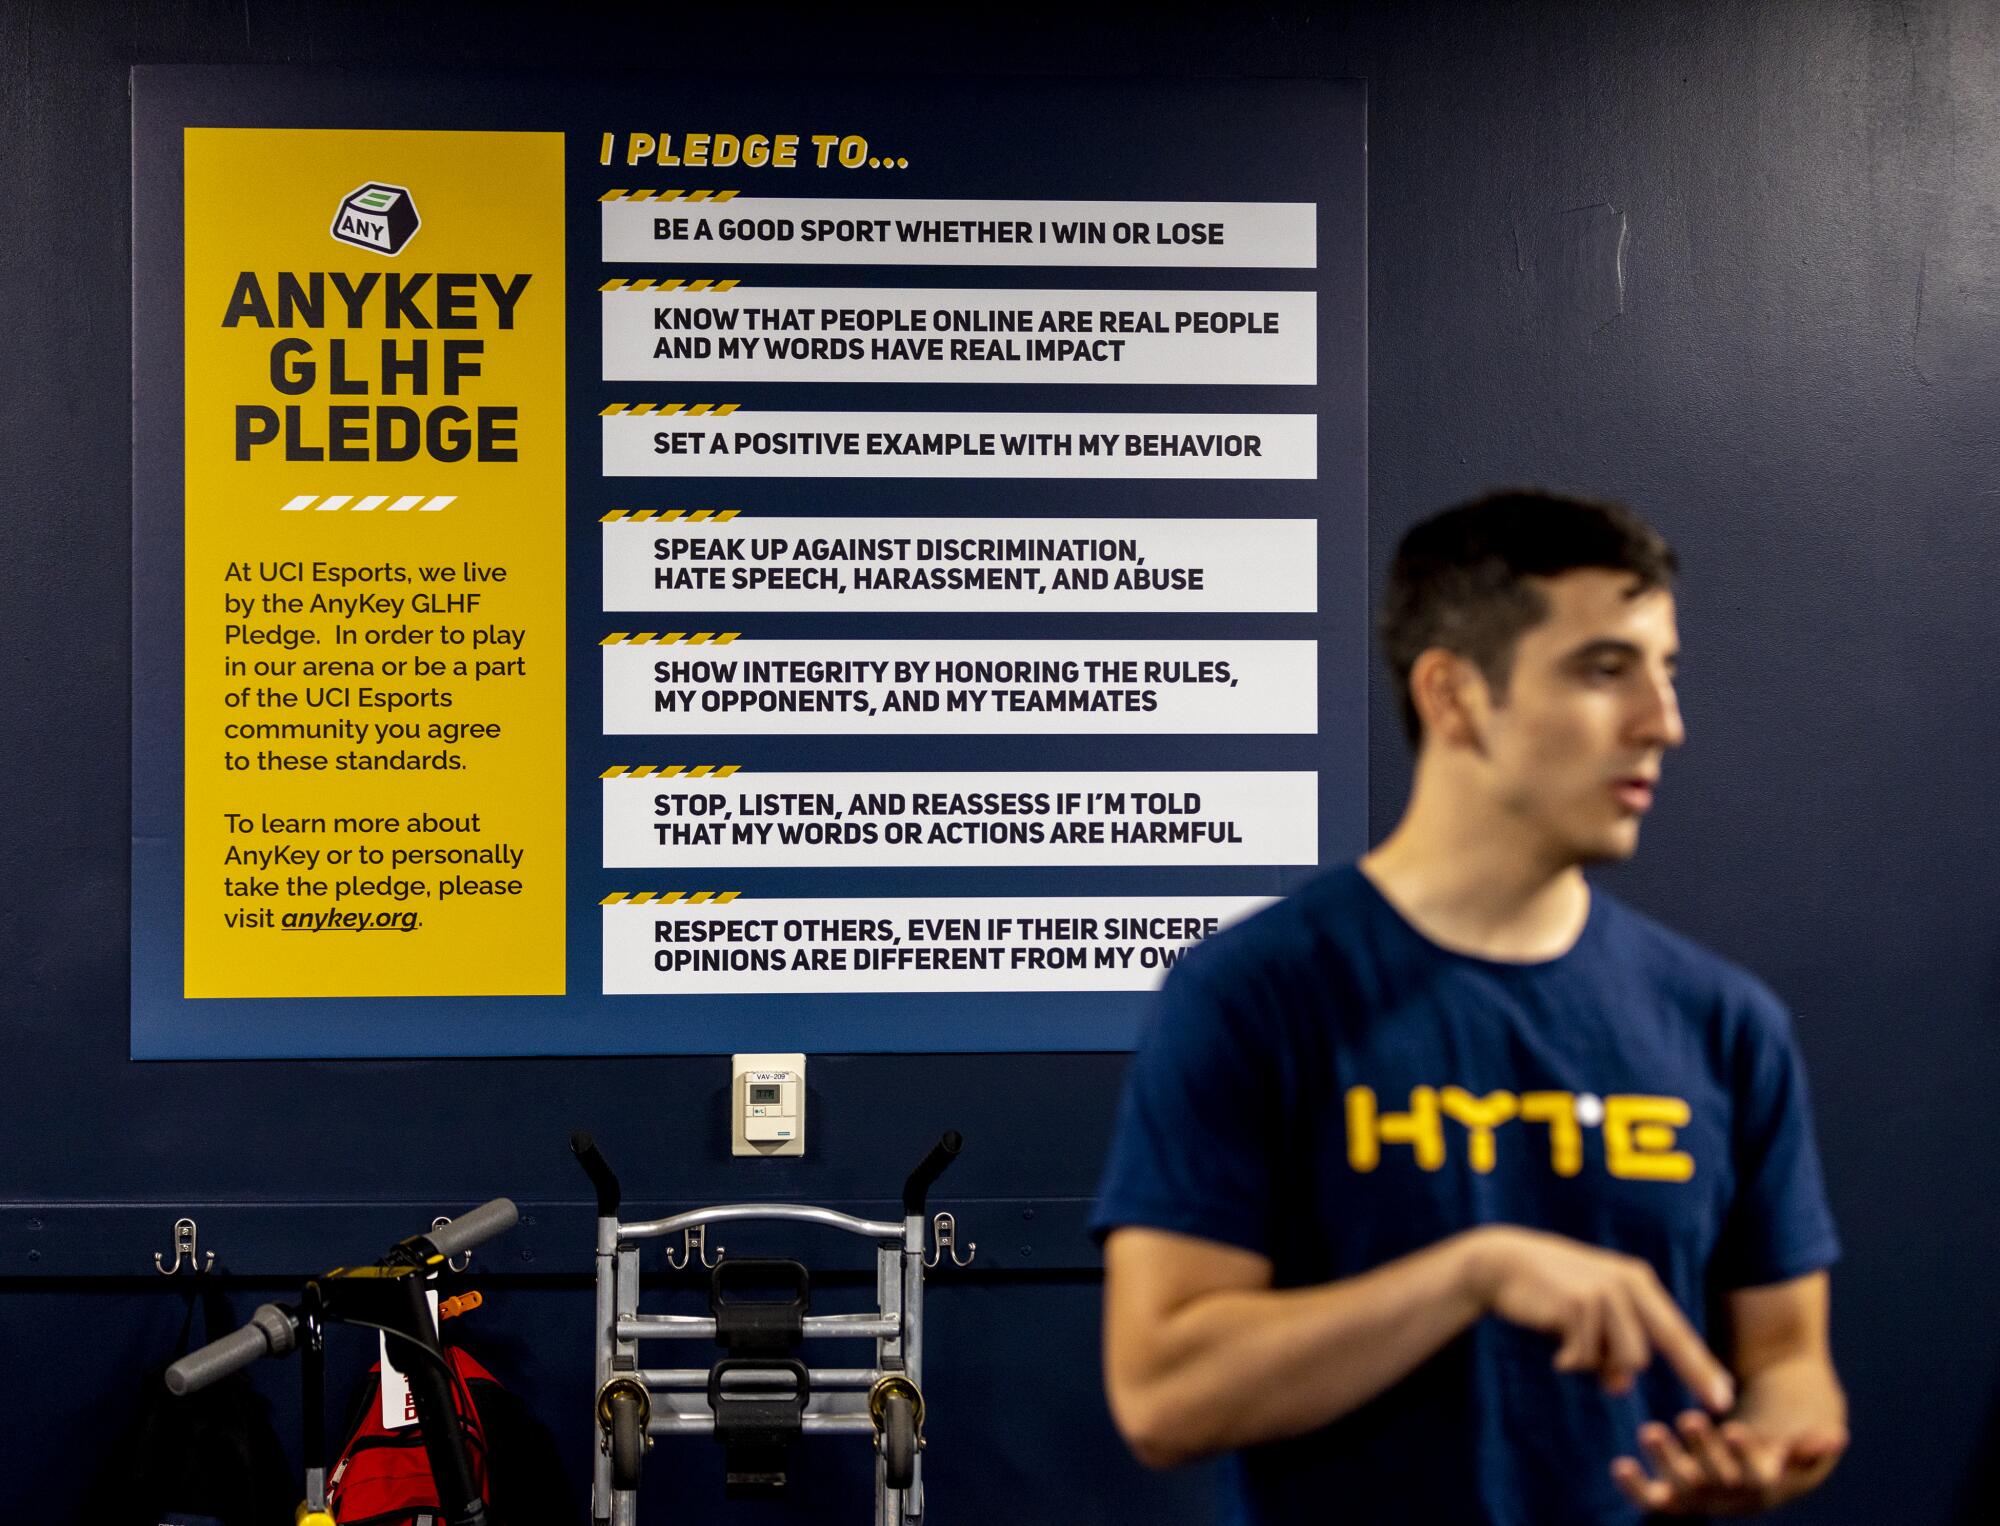 Phillip Rodriguez is shown with a poster of the UCI esports pledge while the team plays Overwatch 2.